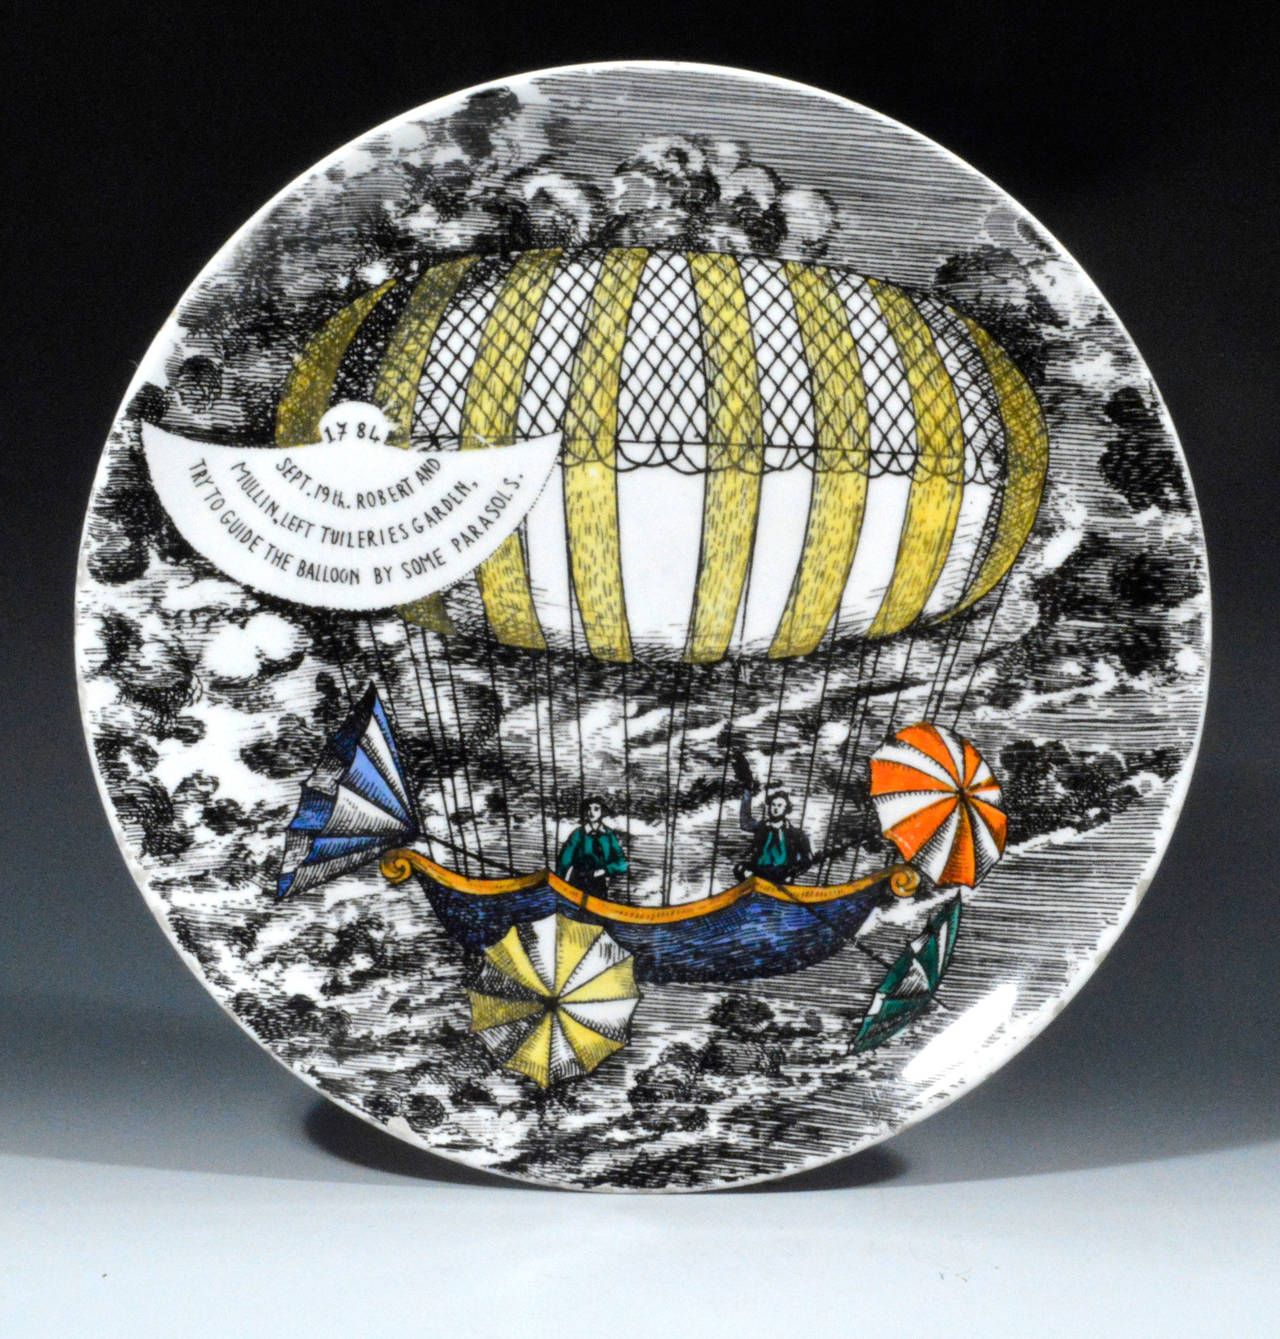 Italian Piero Fornasetti Porcelain Plates with the Mongolfiere (Hot Air) Design